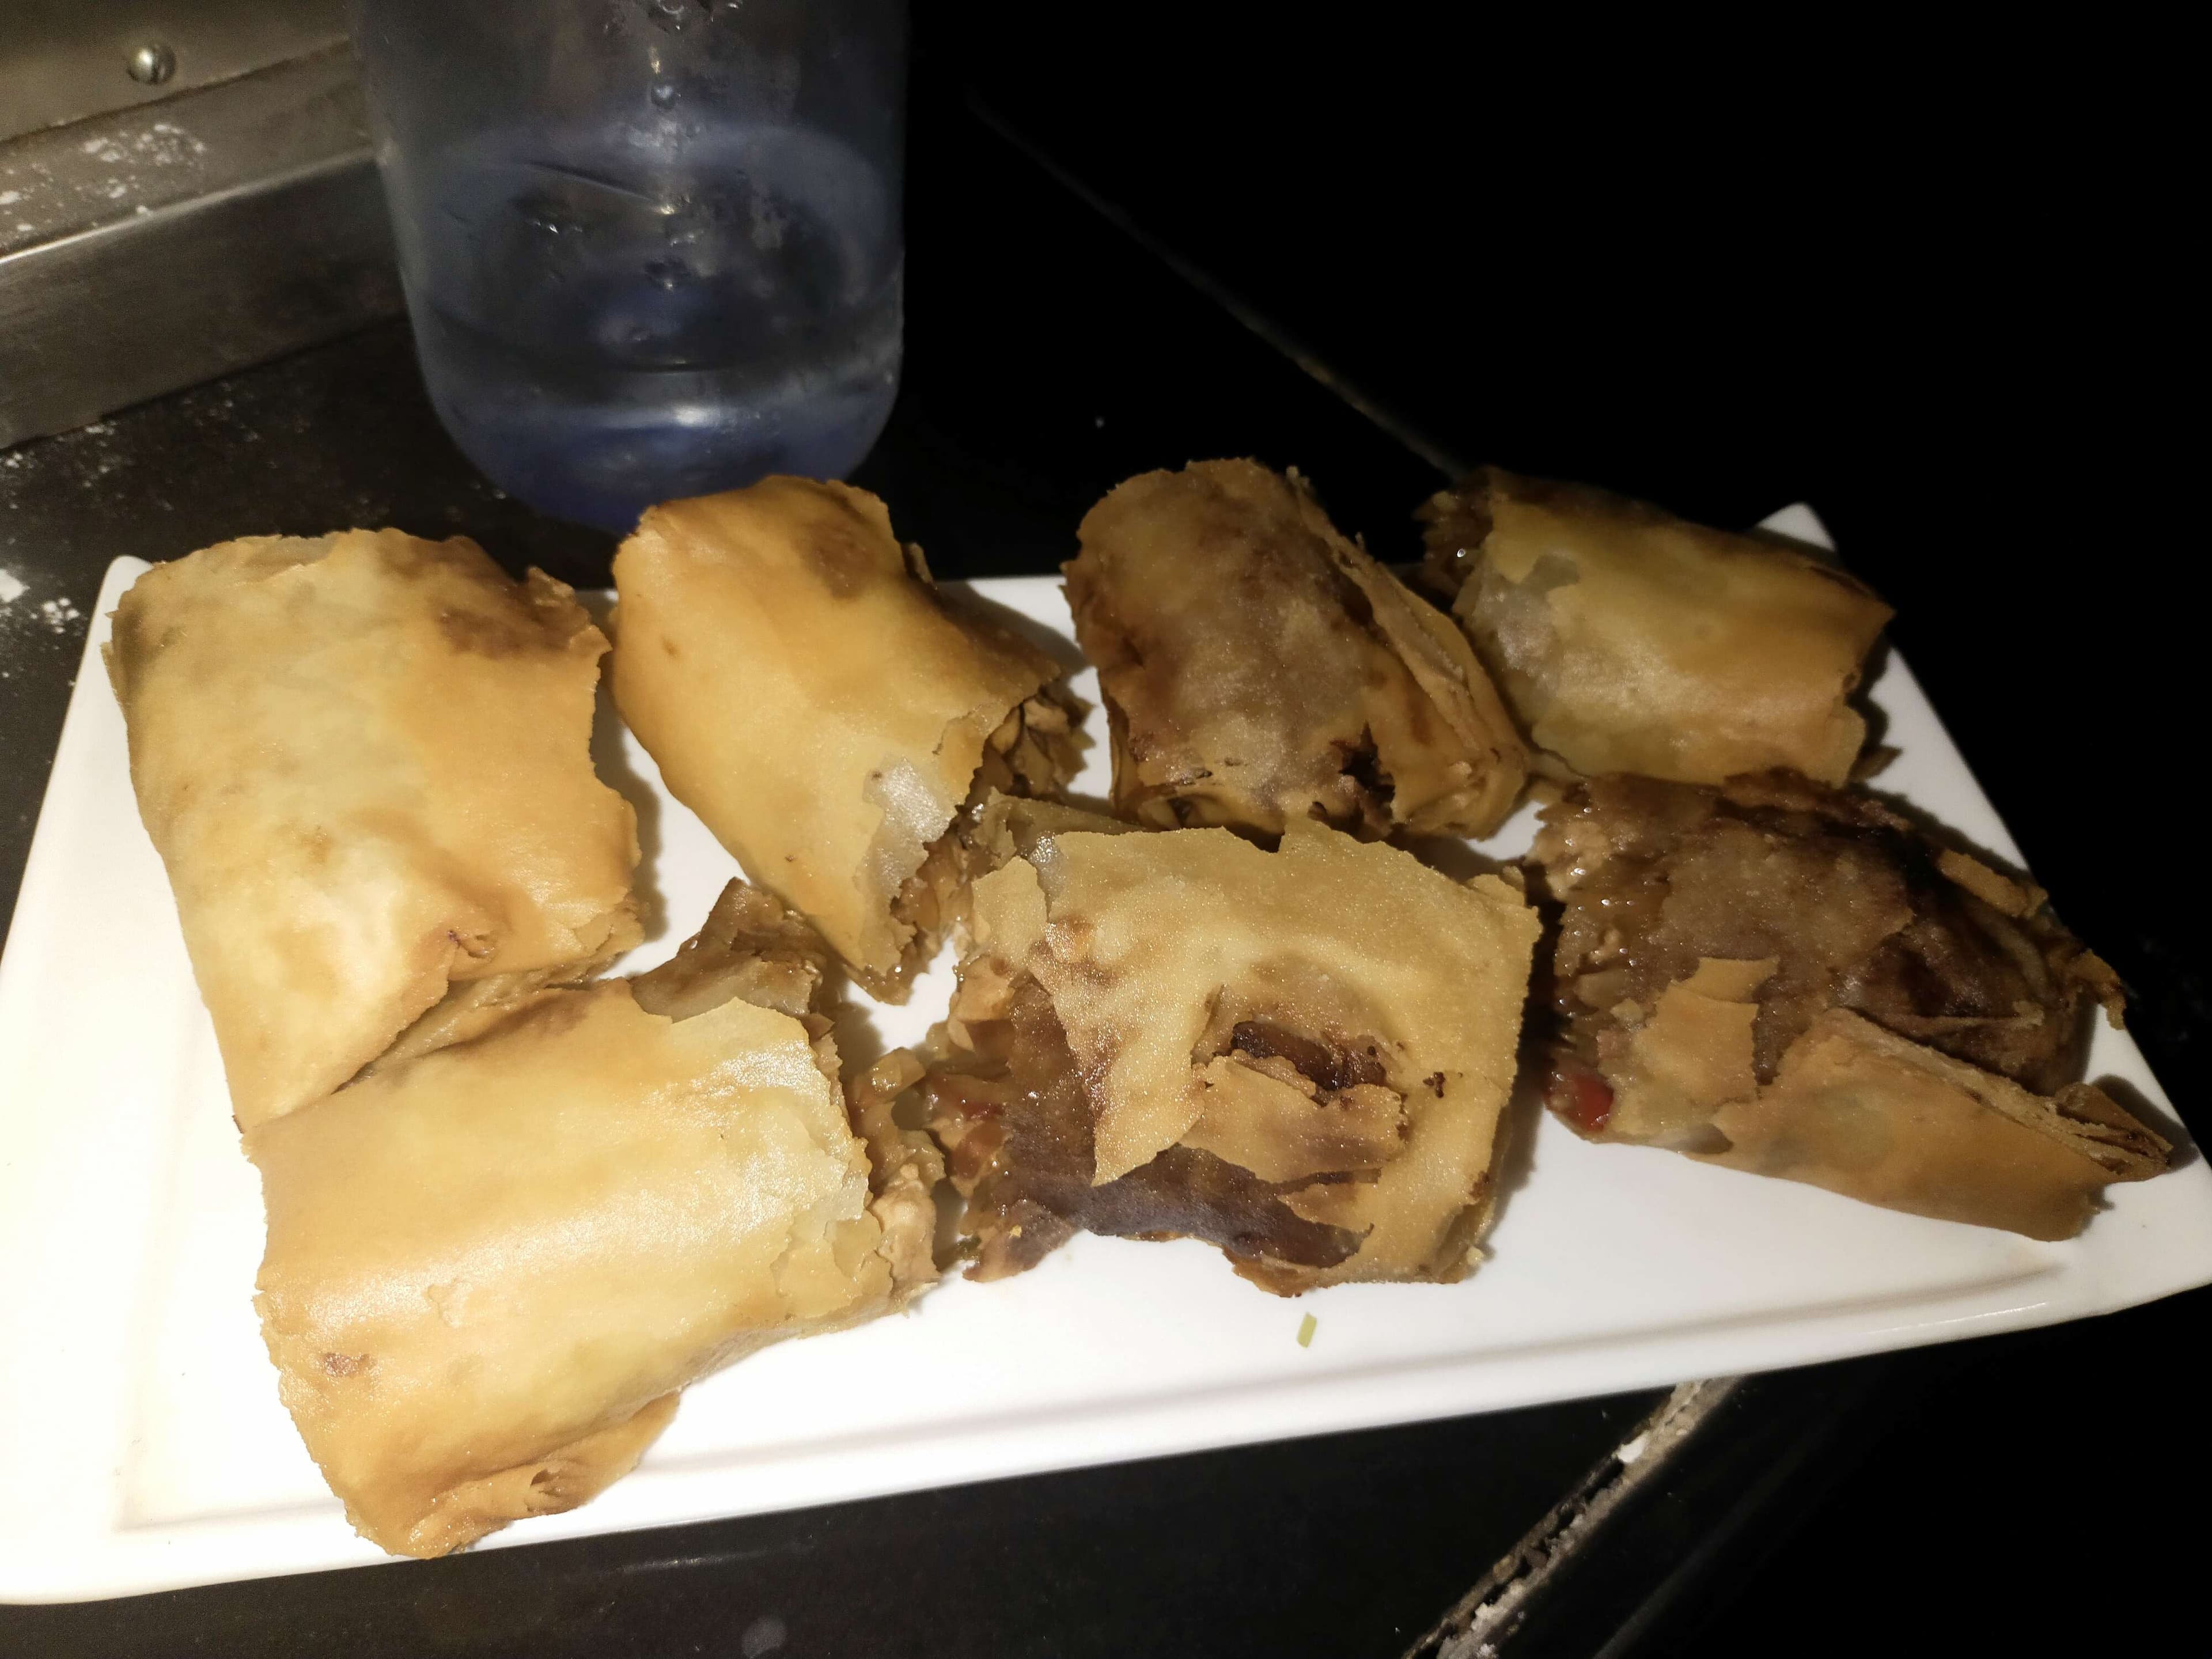 Delicious Chicken Spring Rolls prepared by COOX